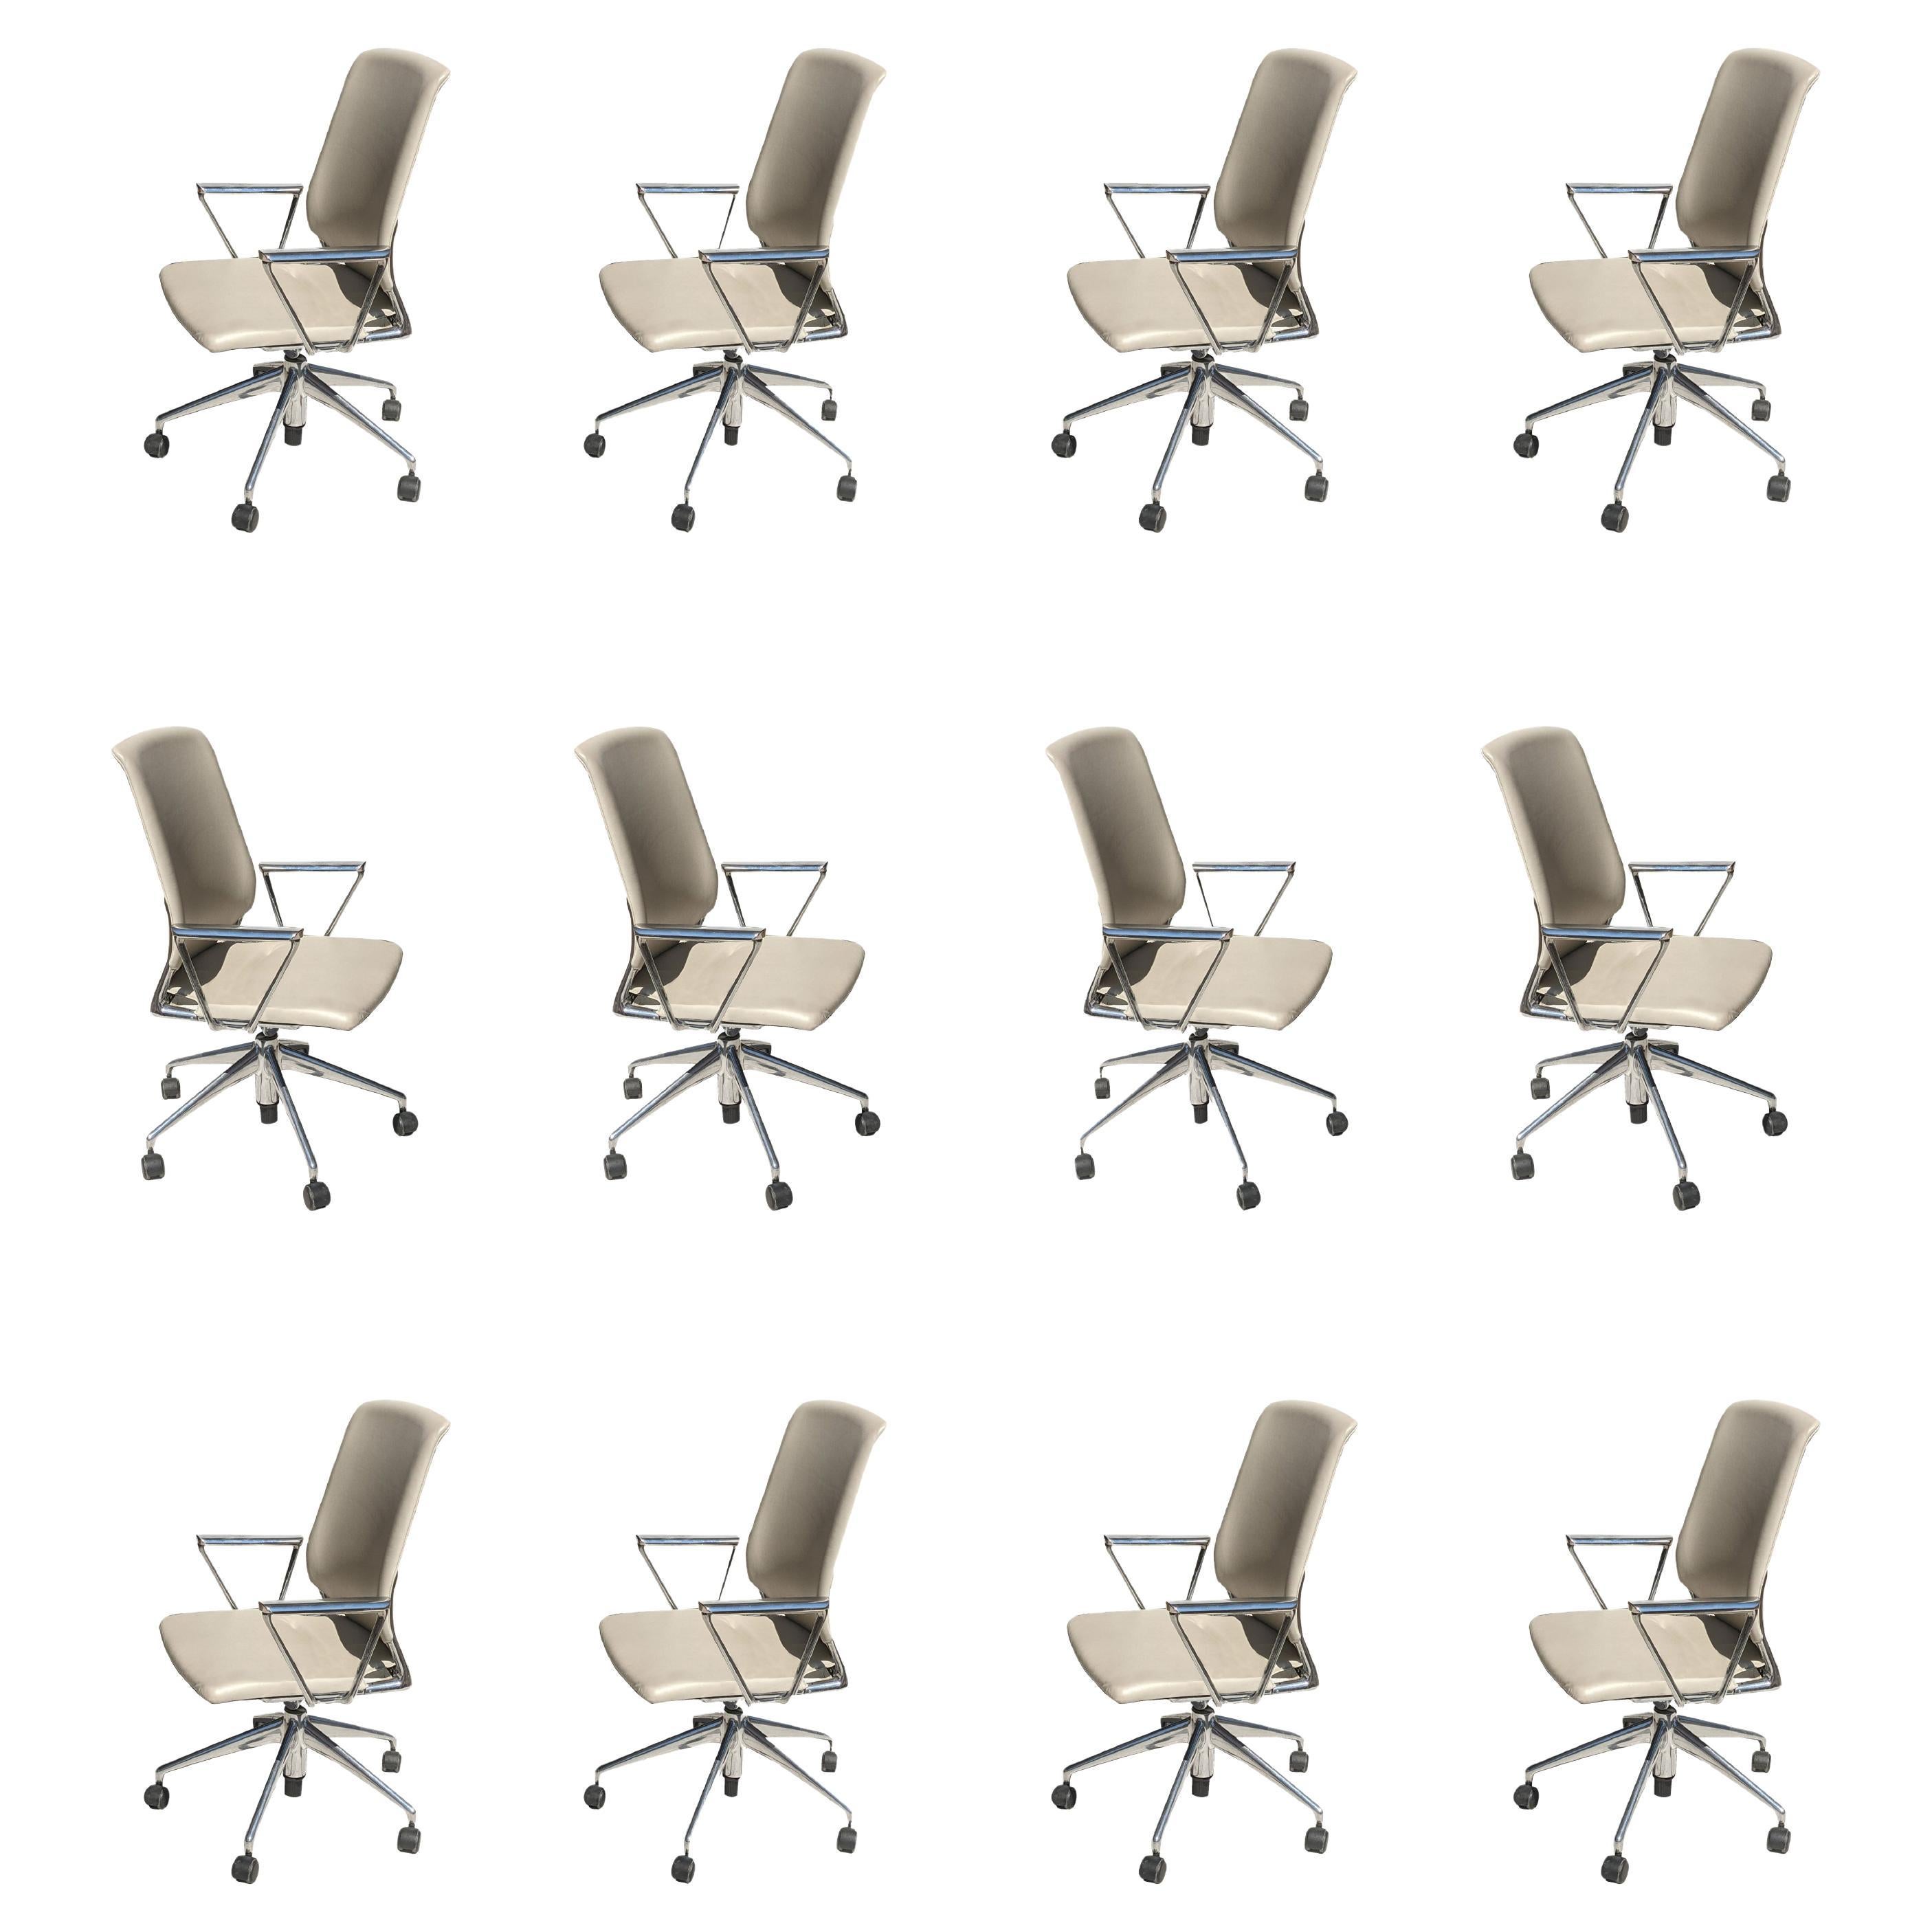 1 Vitra Meta Conference Chair by Alberto Meda 12 Available